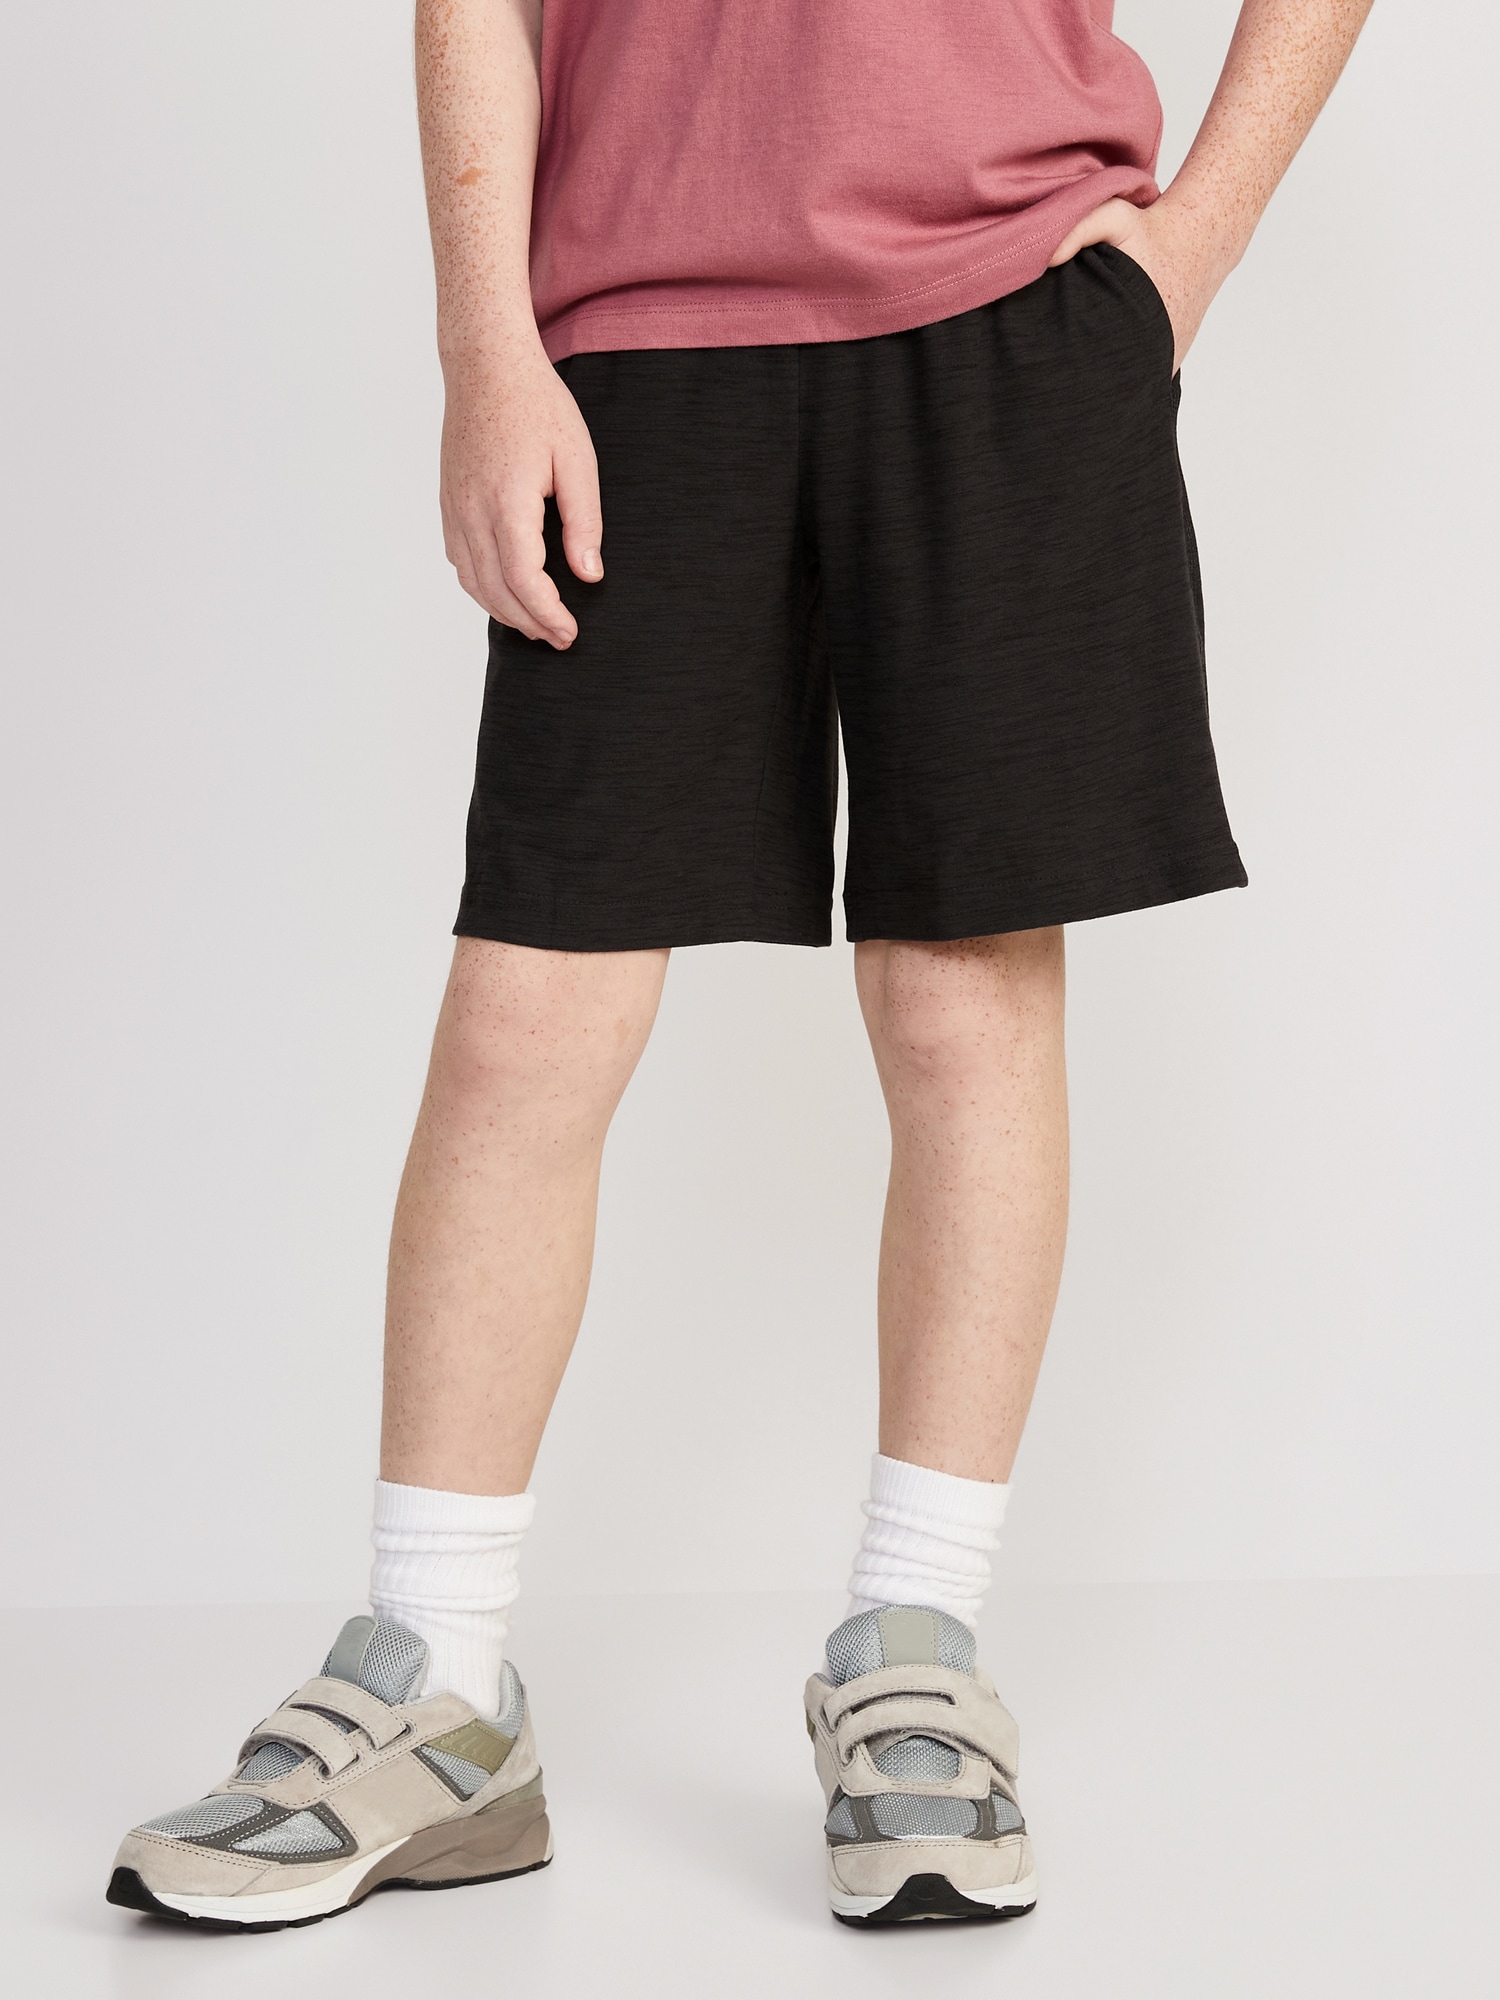 Old Navy Breathe ON Shorts for Boys (At Knee) black. 1